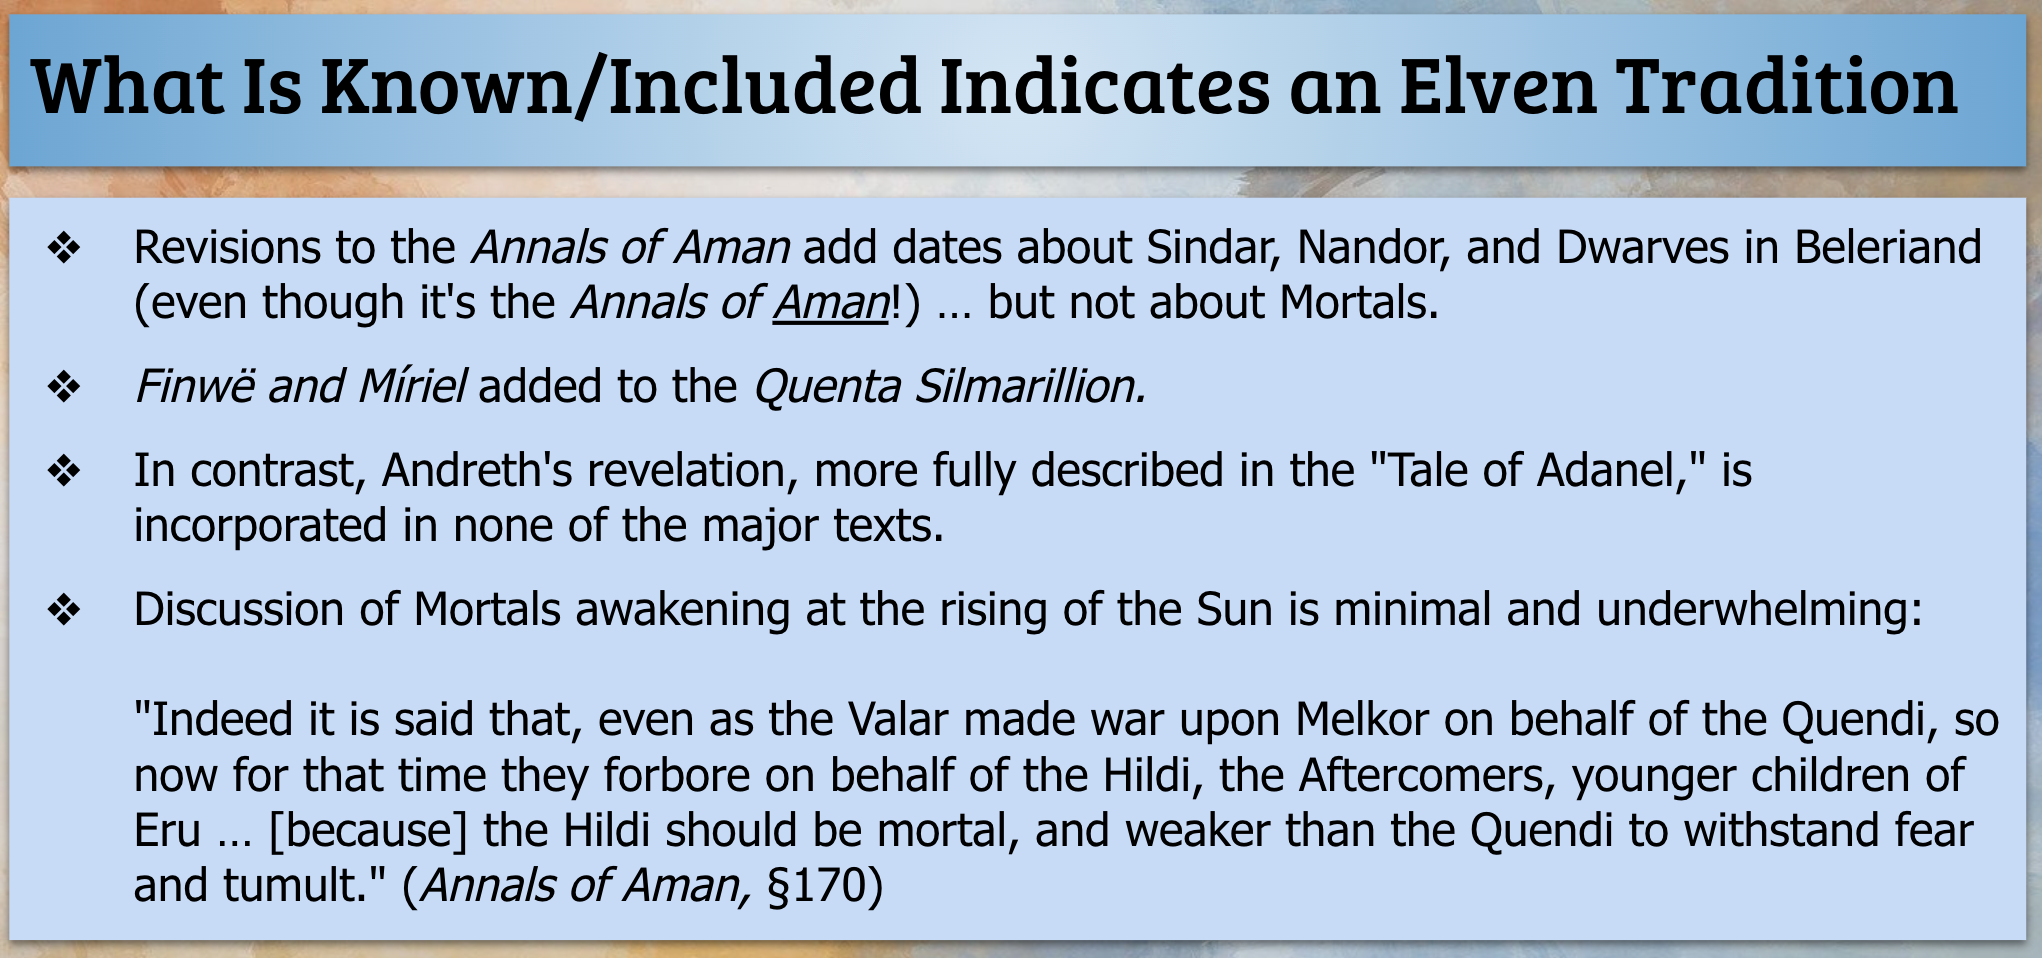 What Is Known/Included Indicates an Elven Tradition. Revisions to the Annals of Aman add dates about Sindar, Nandor, and Dwarves in Beleriand (even though it's the Annals of Aman!) … but not about Mortals. Finwë and Míriel added to the Quenta Silmarillion. In contrast, Andreth's revelation, more fully described in the 'Tale of Adanel,' is incorporated in none of the major texts. Discussion of Mortals awakening at the rising of the Sun is minimal and underwhelming: 'Indeed it is said that, even as the Valar made war upon Melkor on behalf of the Quendi, so now for that time they forbore on behalf of the Hildi, the Aftercomers, younger children of Eru … [because] the Hildi should be mortal, and weaker than the Quendi to withstand fear and tumult.' (Annals of Aman, §170)